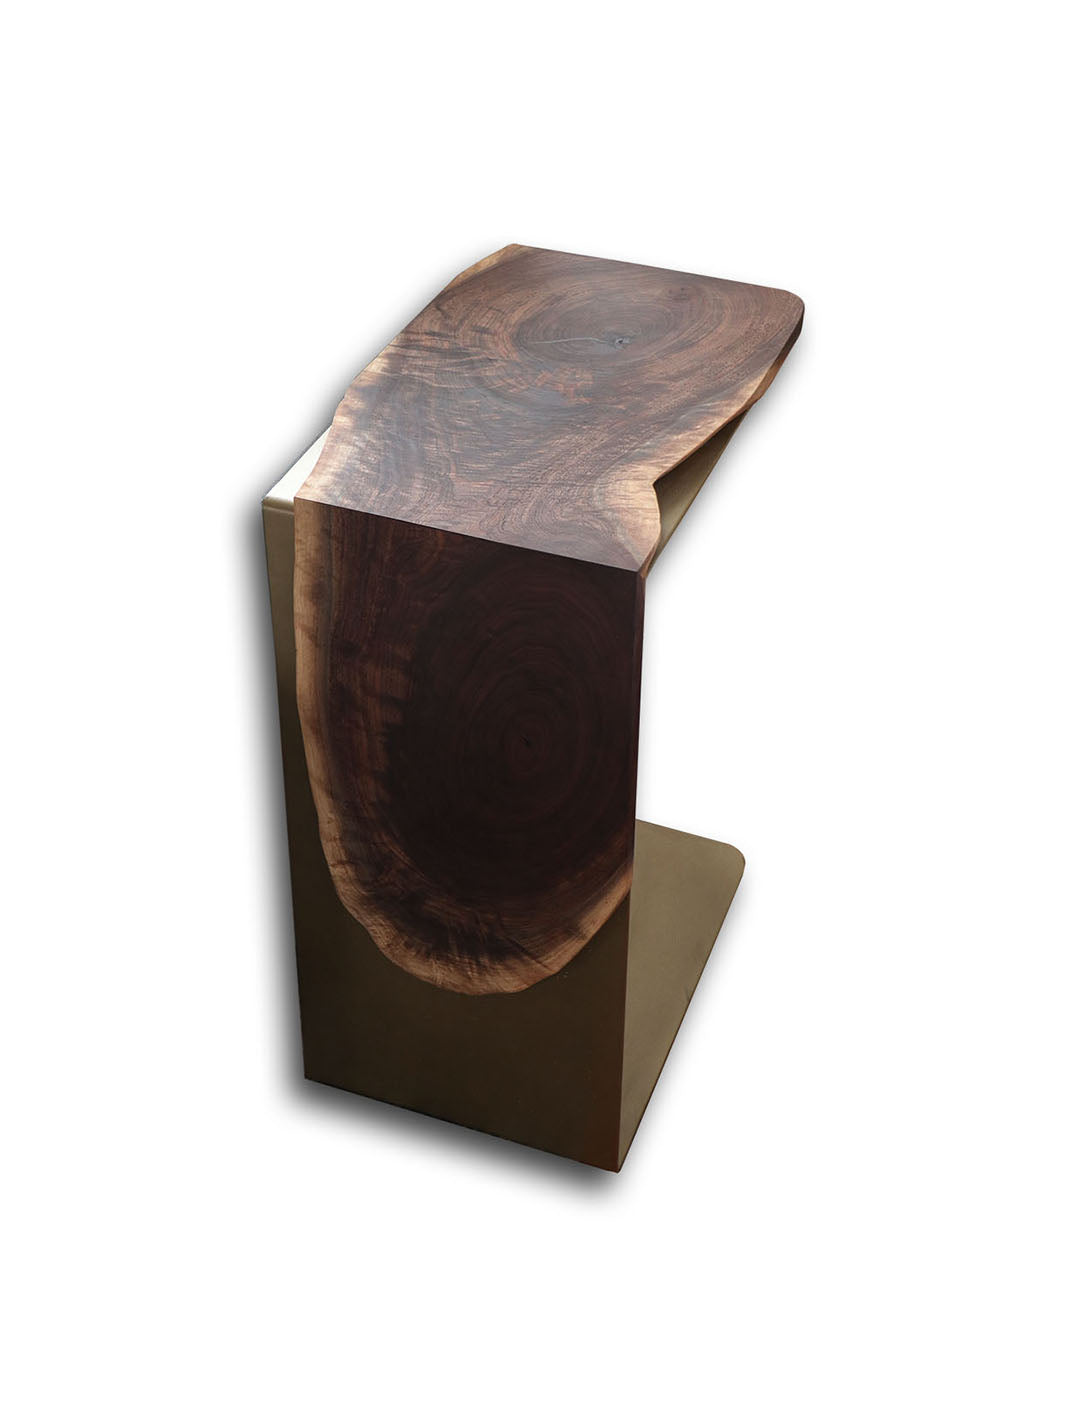 Earthly Comfort Live-Edge Walnut Waterfall Plate C-Table Earthly Comfort Side Tables 